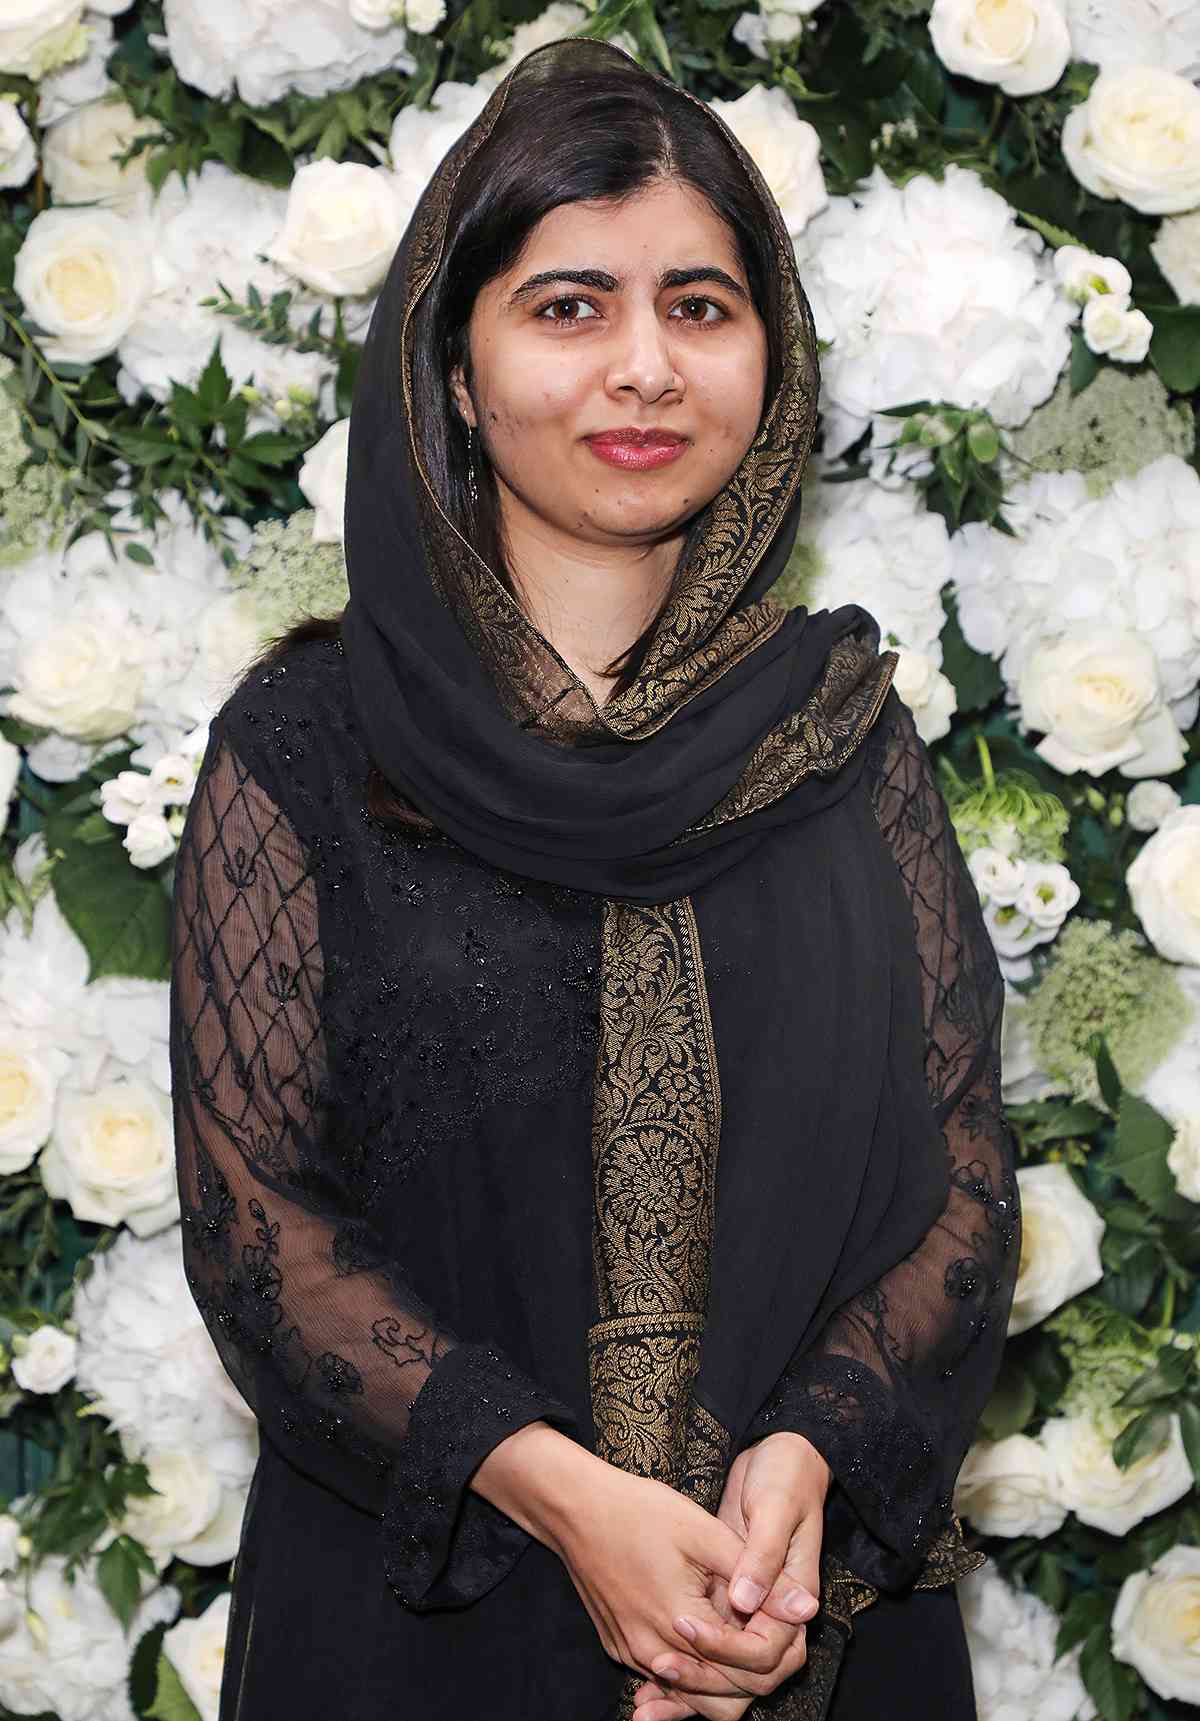 LONDON, ENGLAND - SEPTEMBER 20: Malala Yousafzai attends an intimate dinner and party hosted by British Vogue and Tiffany & Co. to celebrate Fashion and Film during London Fashion Week September 2021 at The Londoner Hotel on September 20, 2021 in London, England.